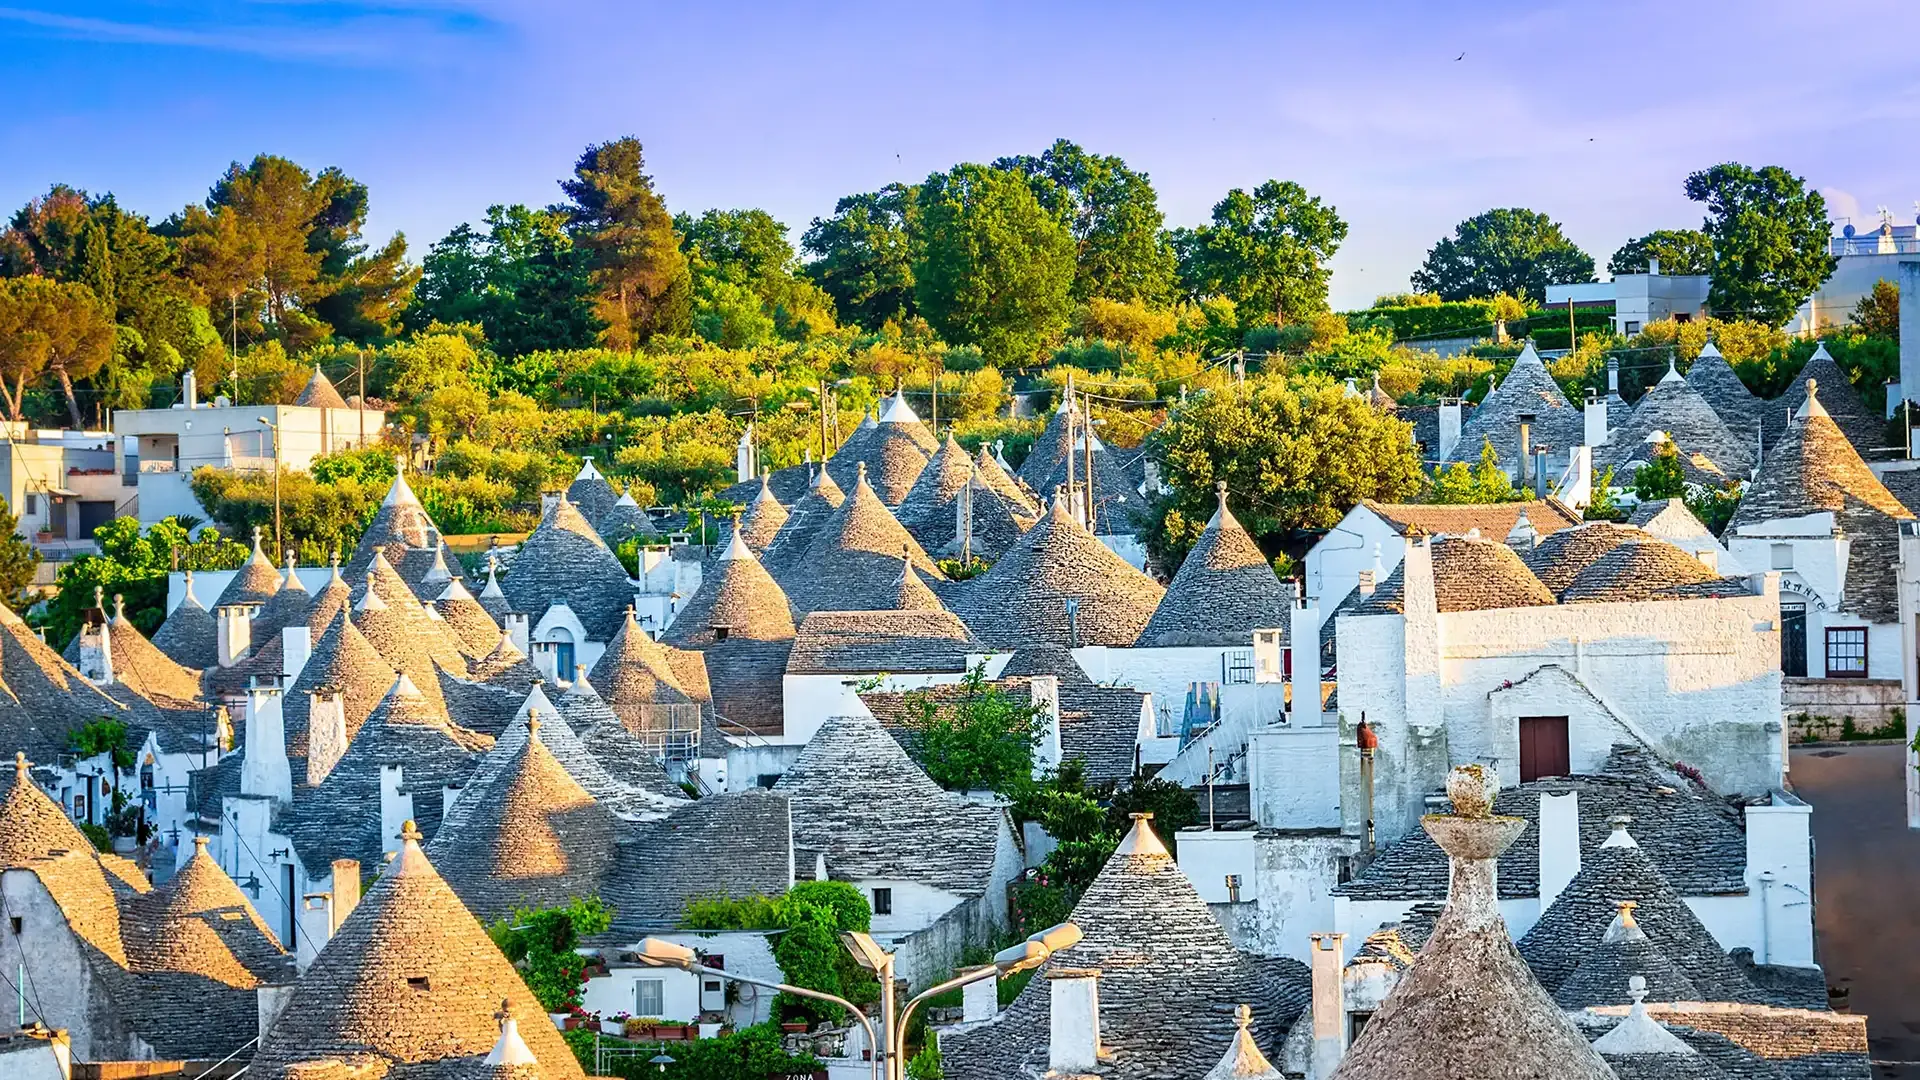 Trulli of Alberobello, traditional houses with conical stone roofs.